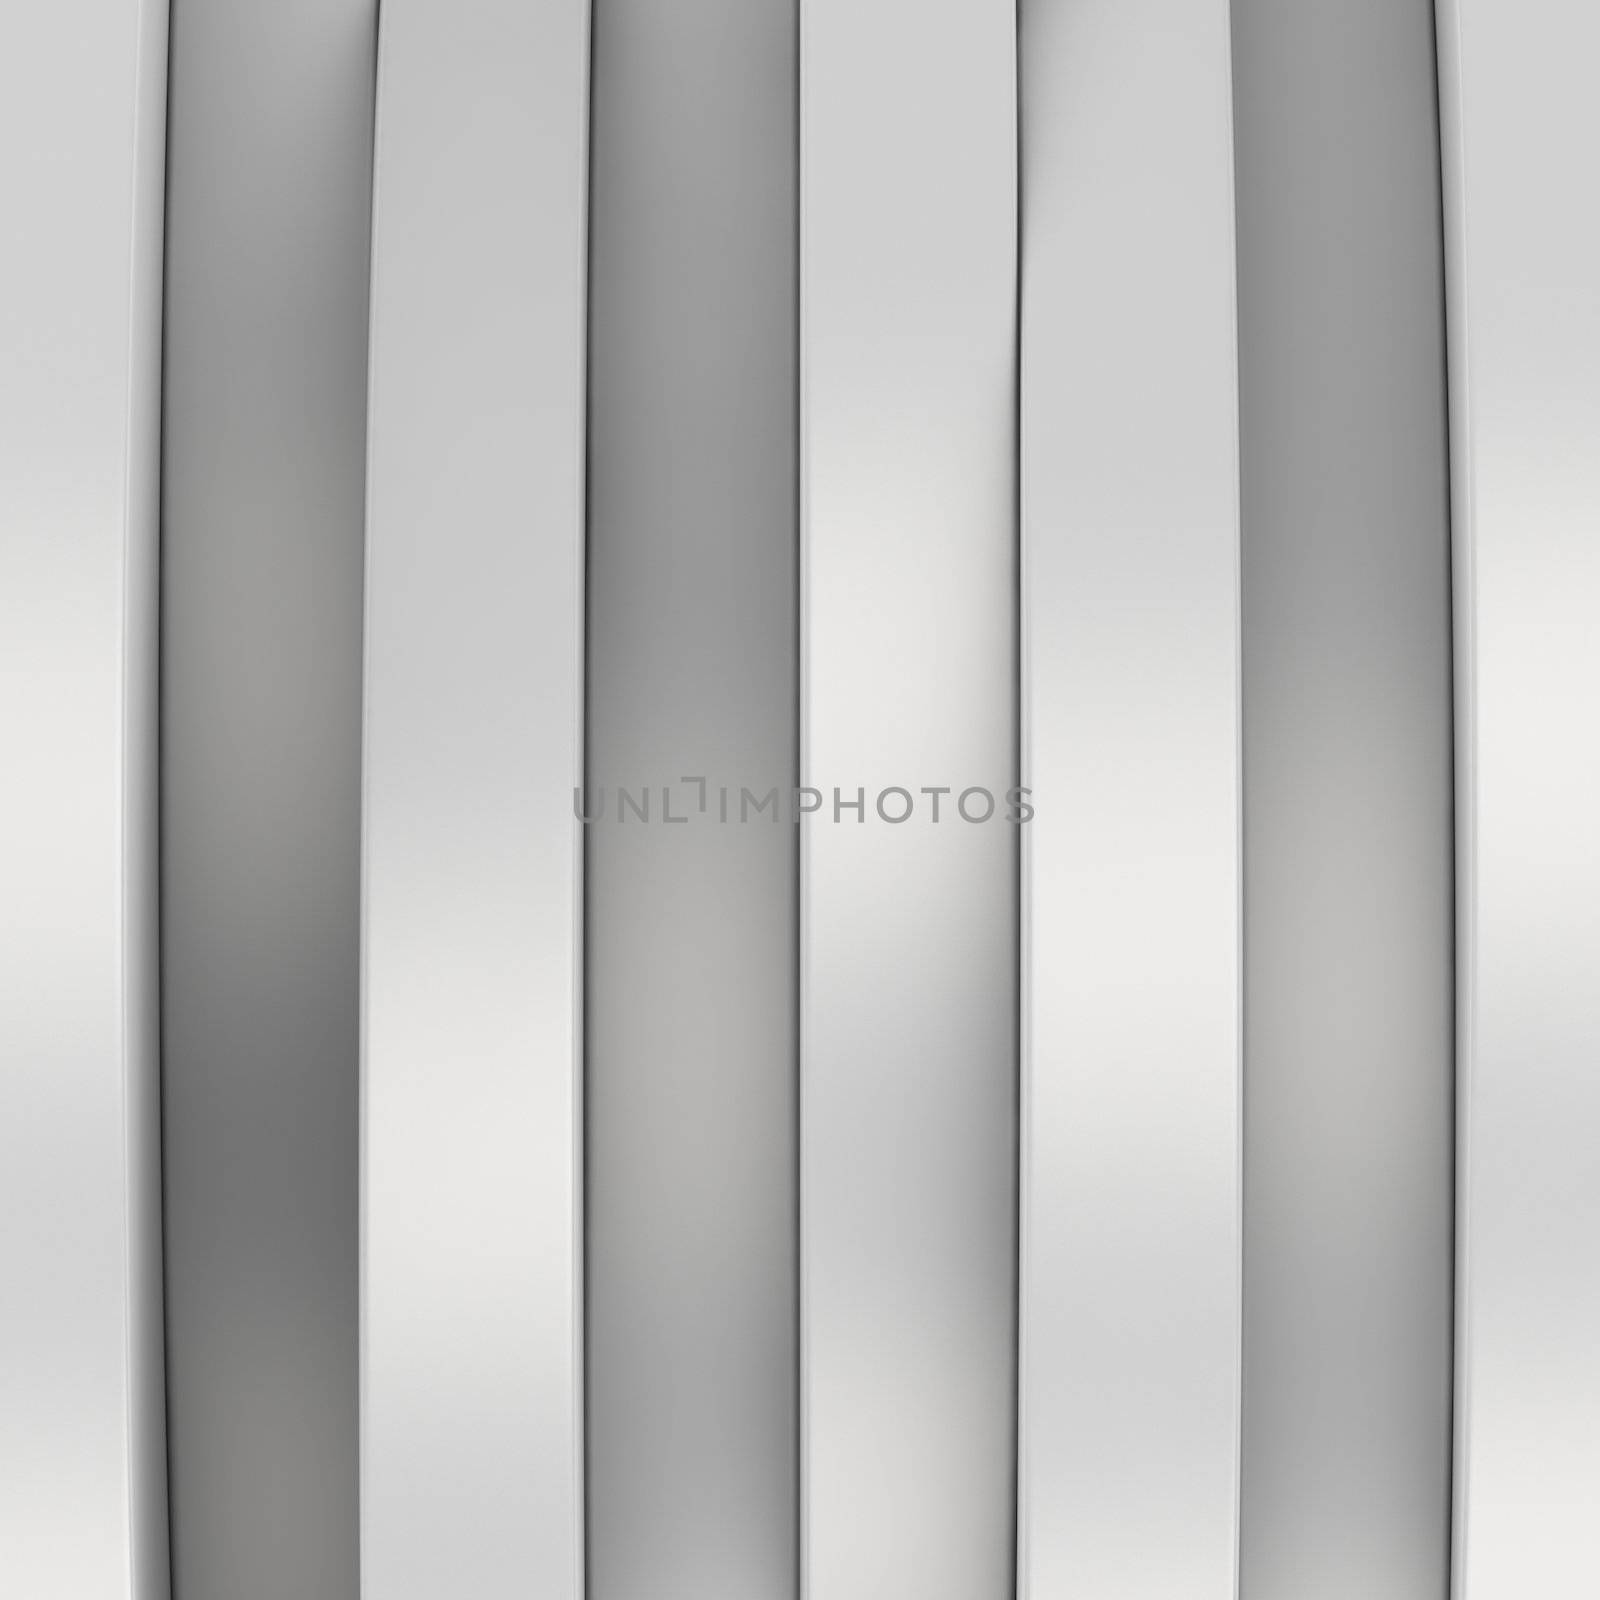 Simple and effective vertical striped background. Or you can rotate it horizontal and write some text, etc.